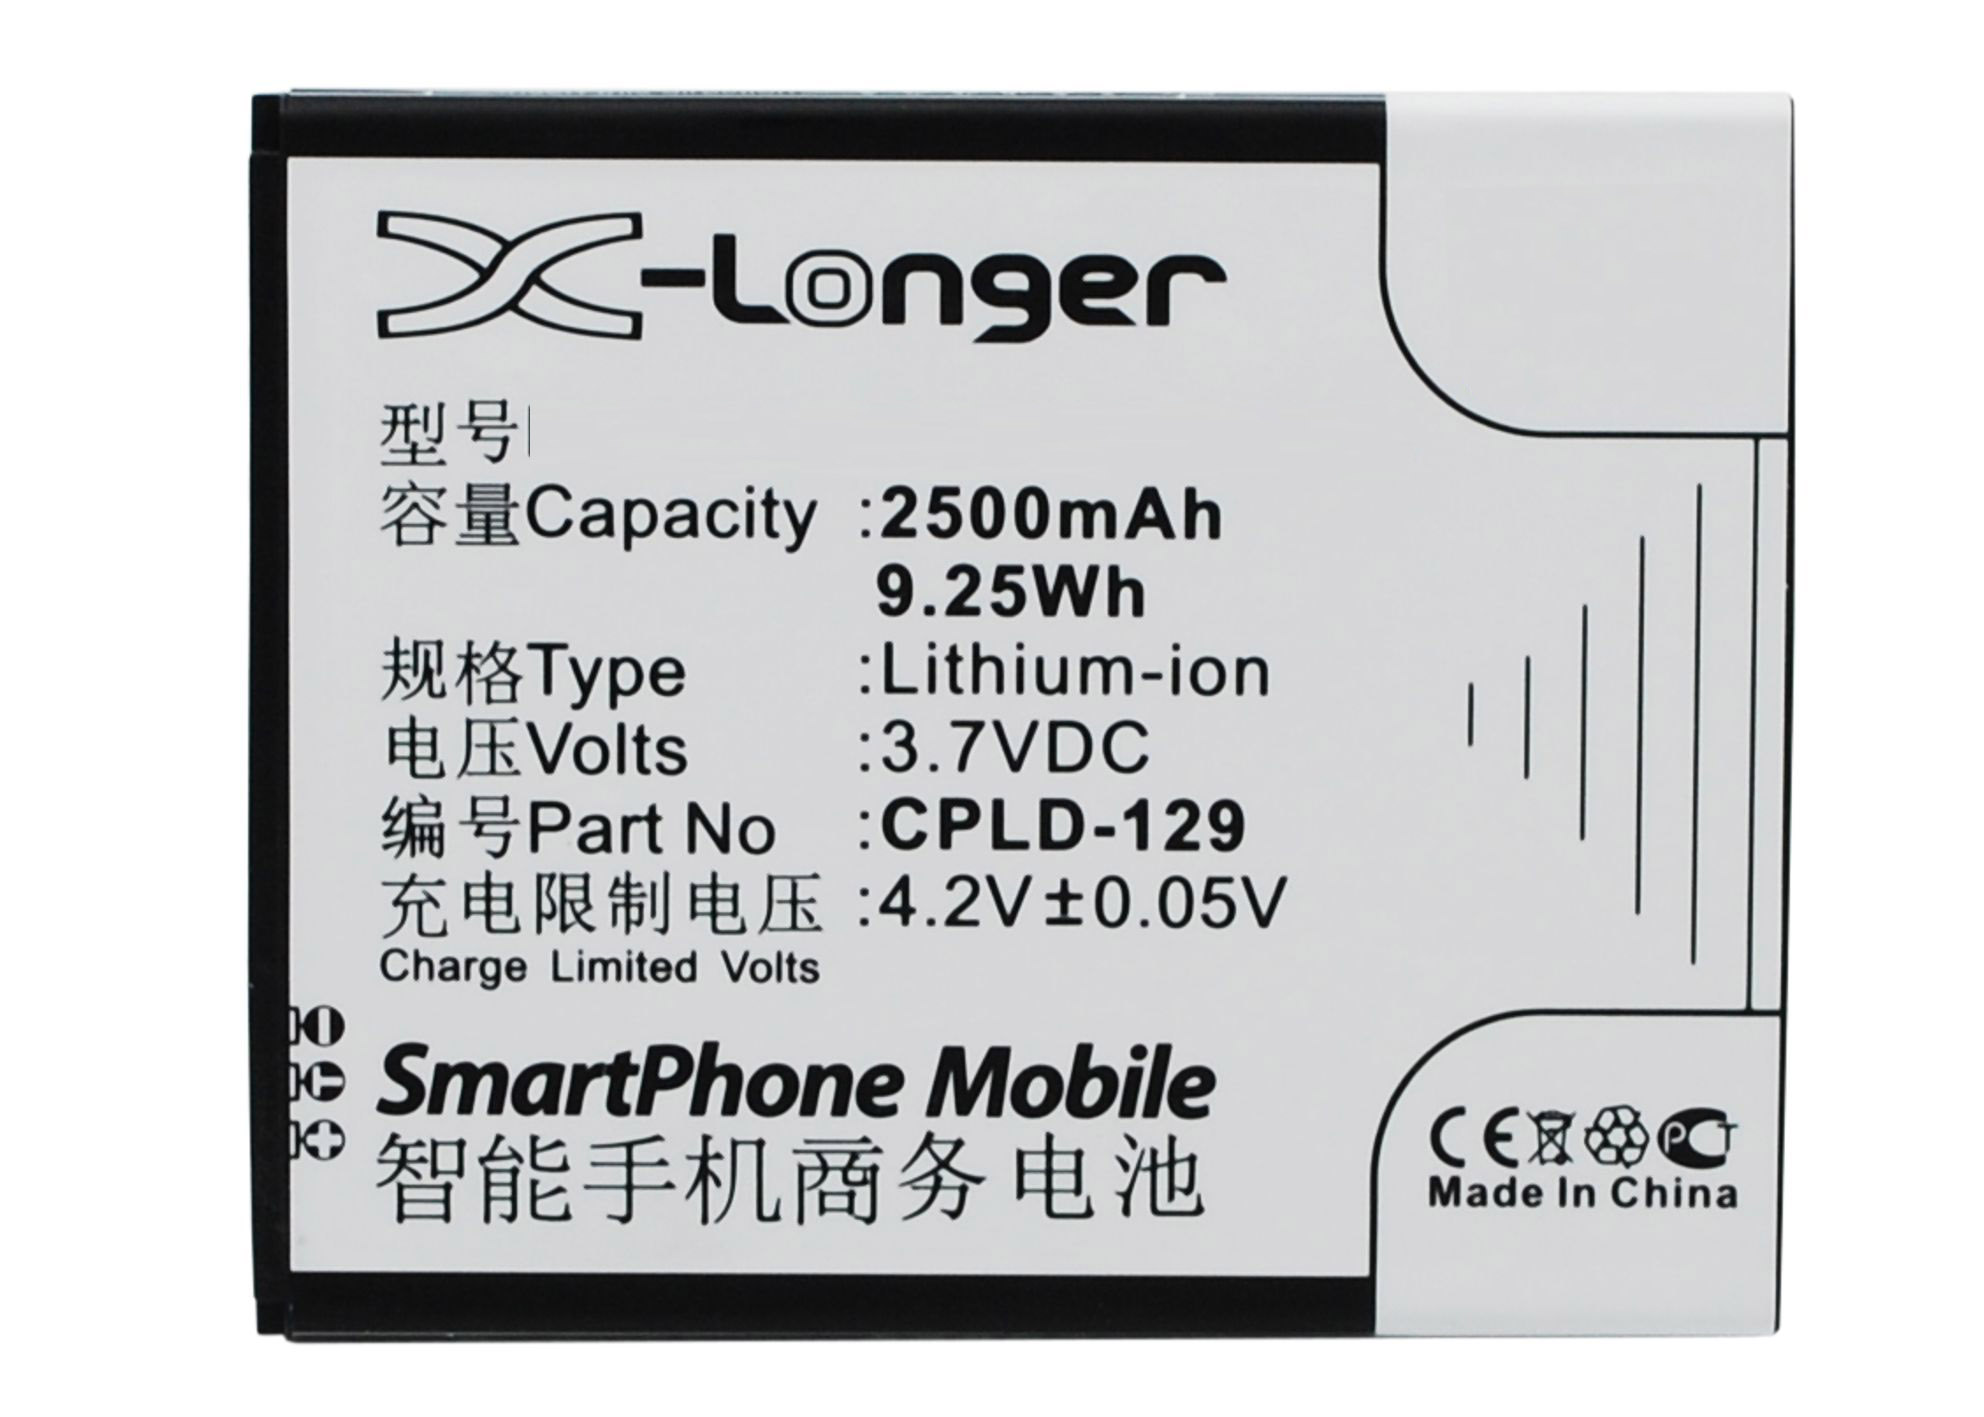 Synergy Digital Battery Compatible With Coolpad CPLD-129 Cellphone Battery - (Li-Ion, 3.7V, 2500 mAh / 9.25Wh)